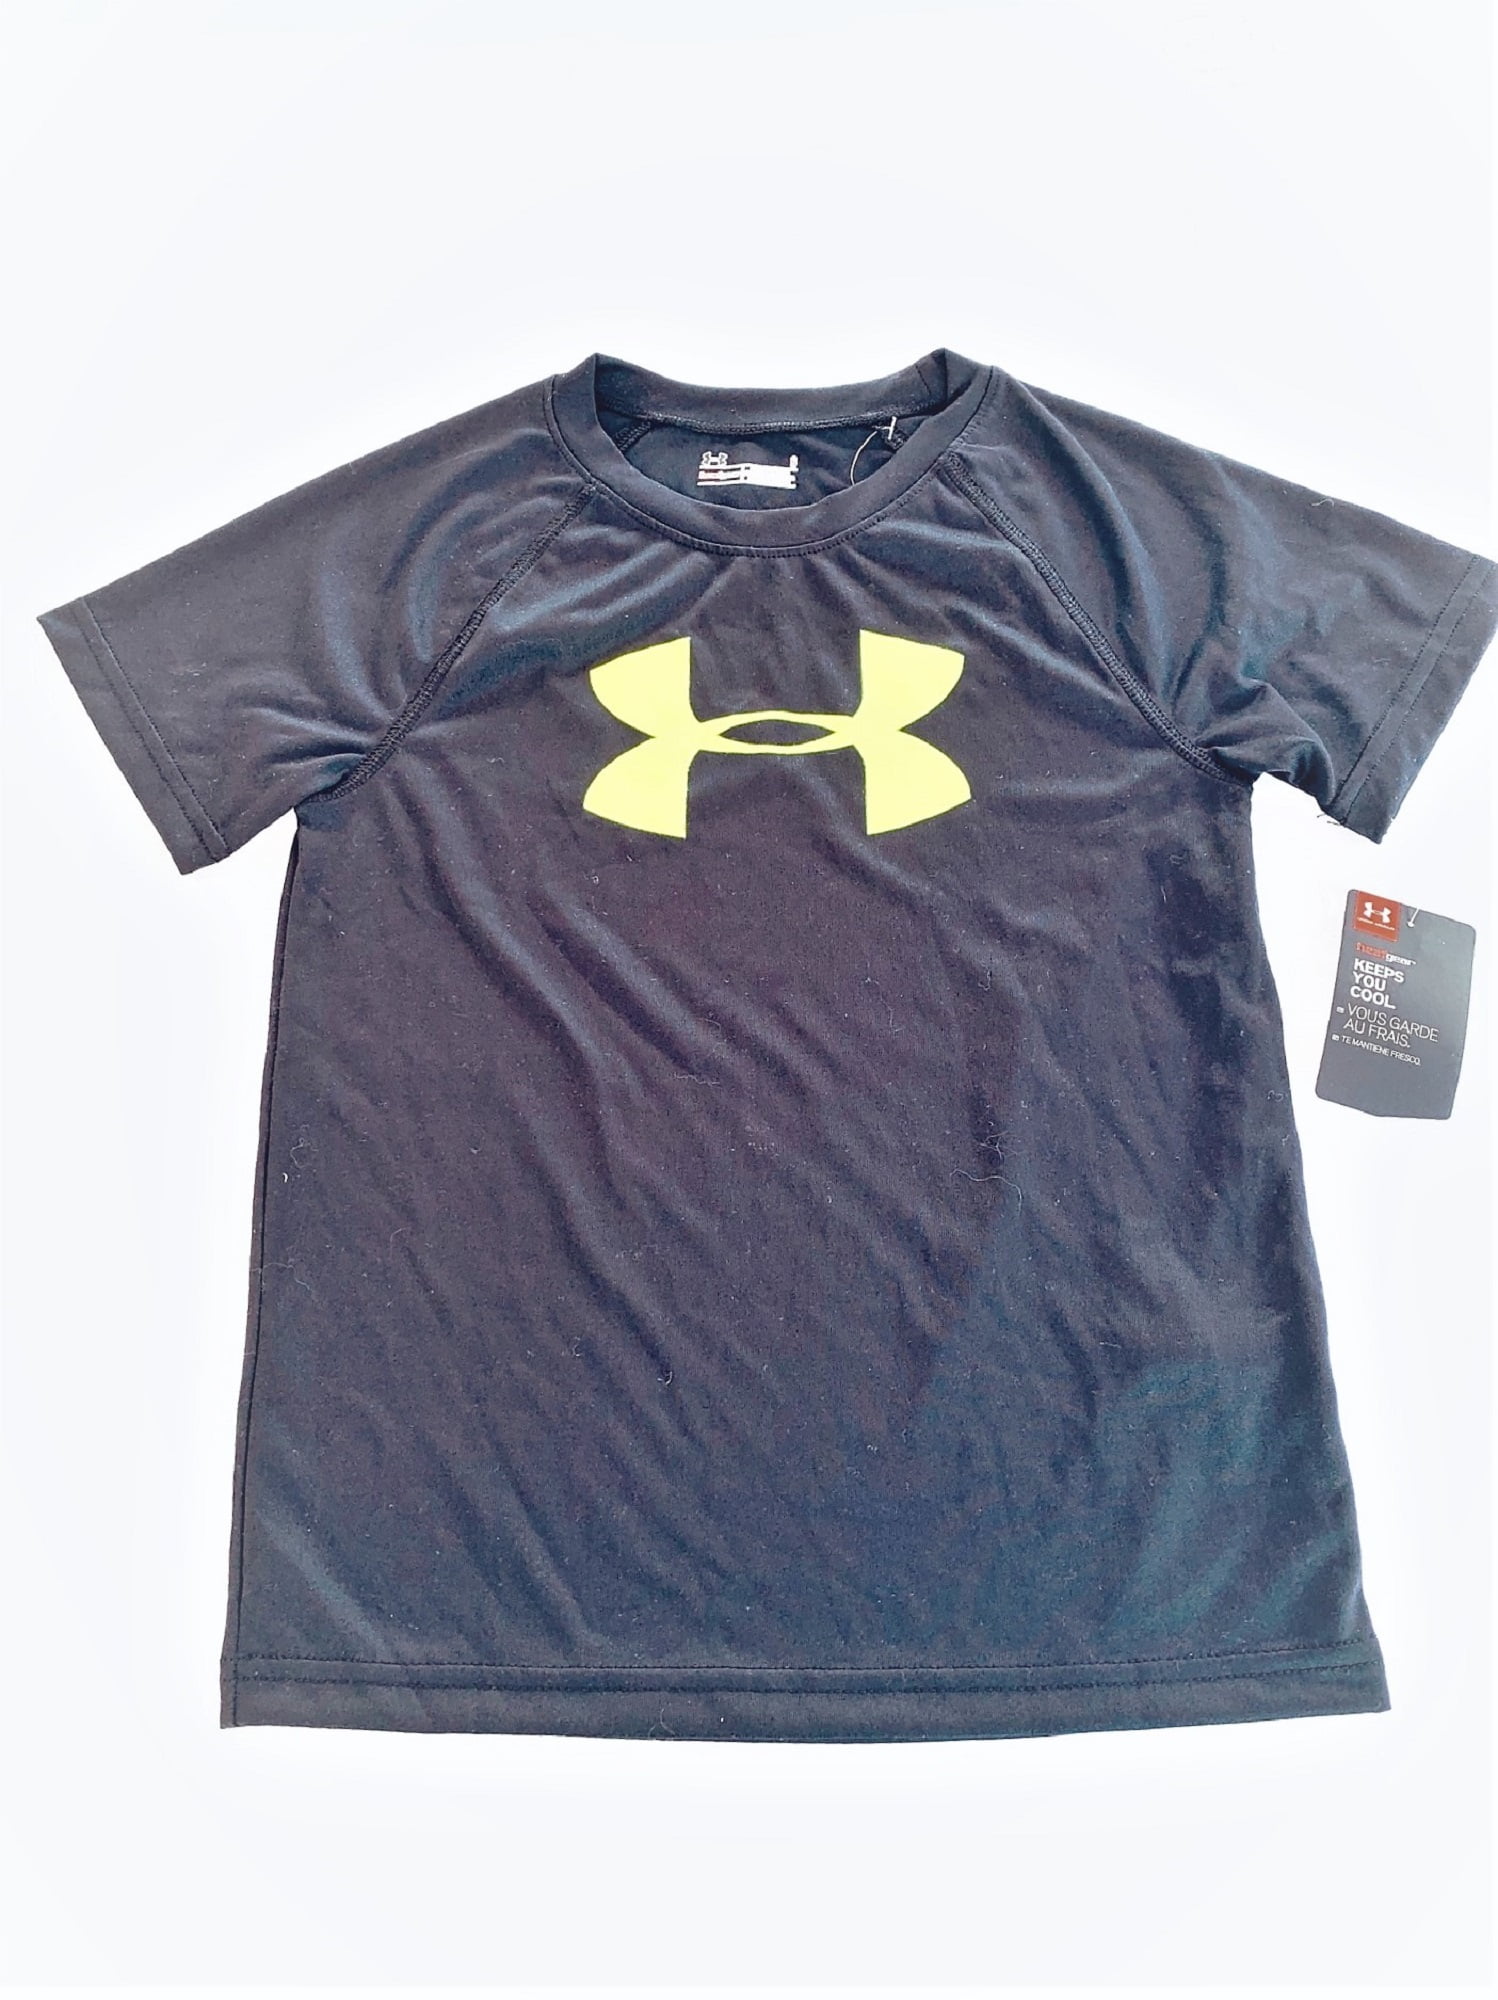 Details about   NWT GIRLS KID UNDER ARMOUR  SWINGING SHORT SLEEVE CREW T SHIRT YMD 